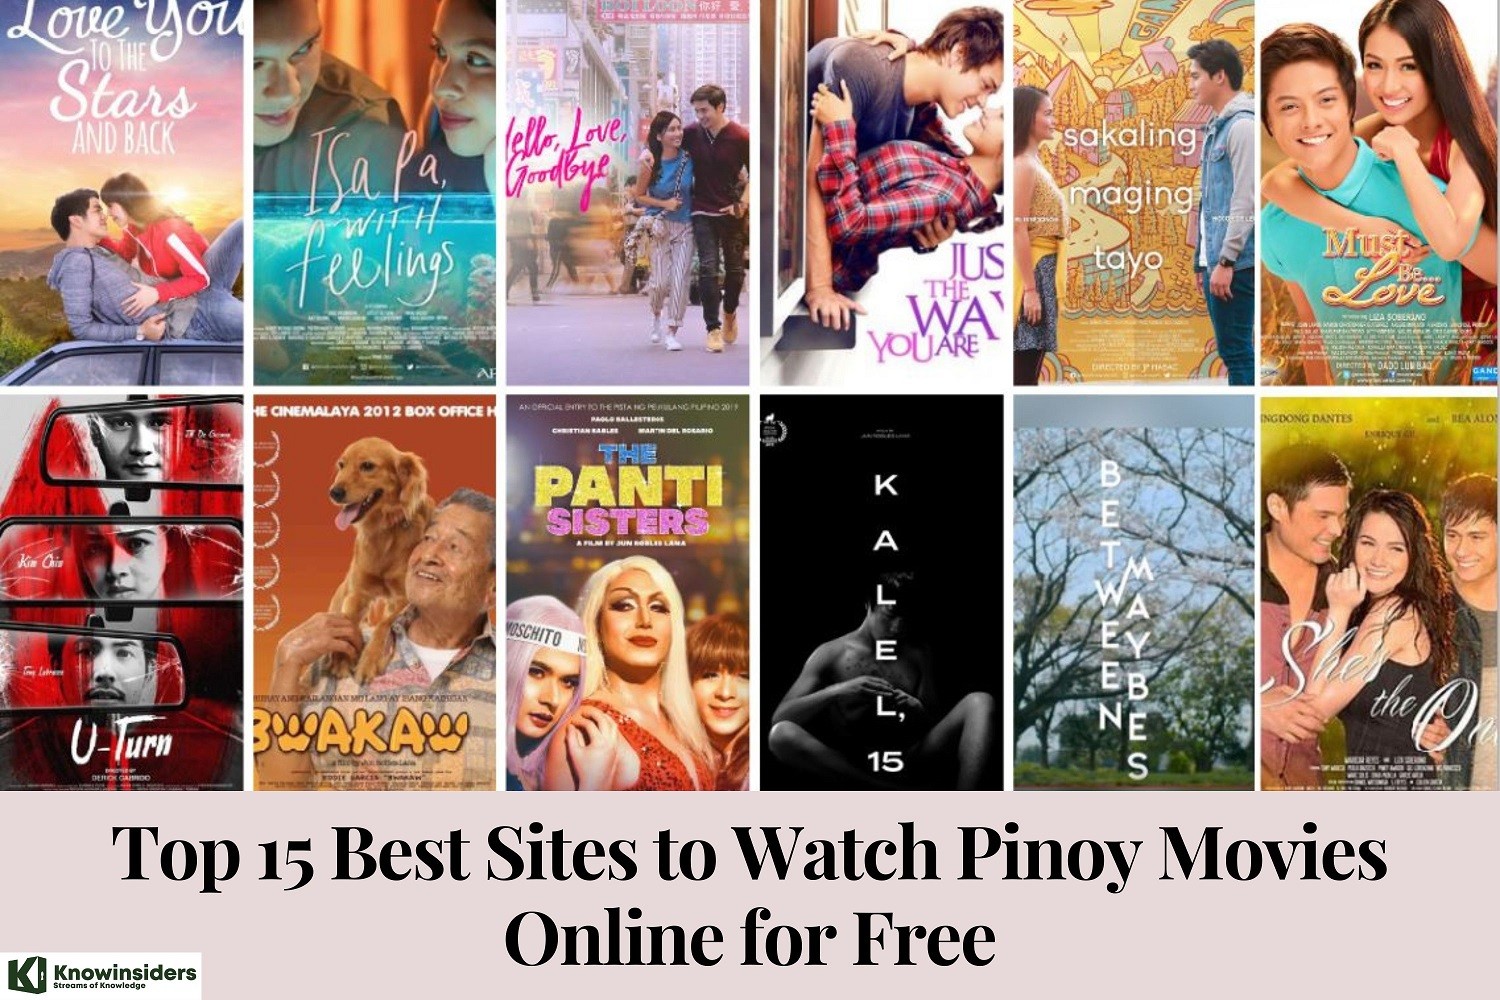 Top 15 Legal Sites to Watch Pinoy Movies Online for Free KnowInsiders